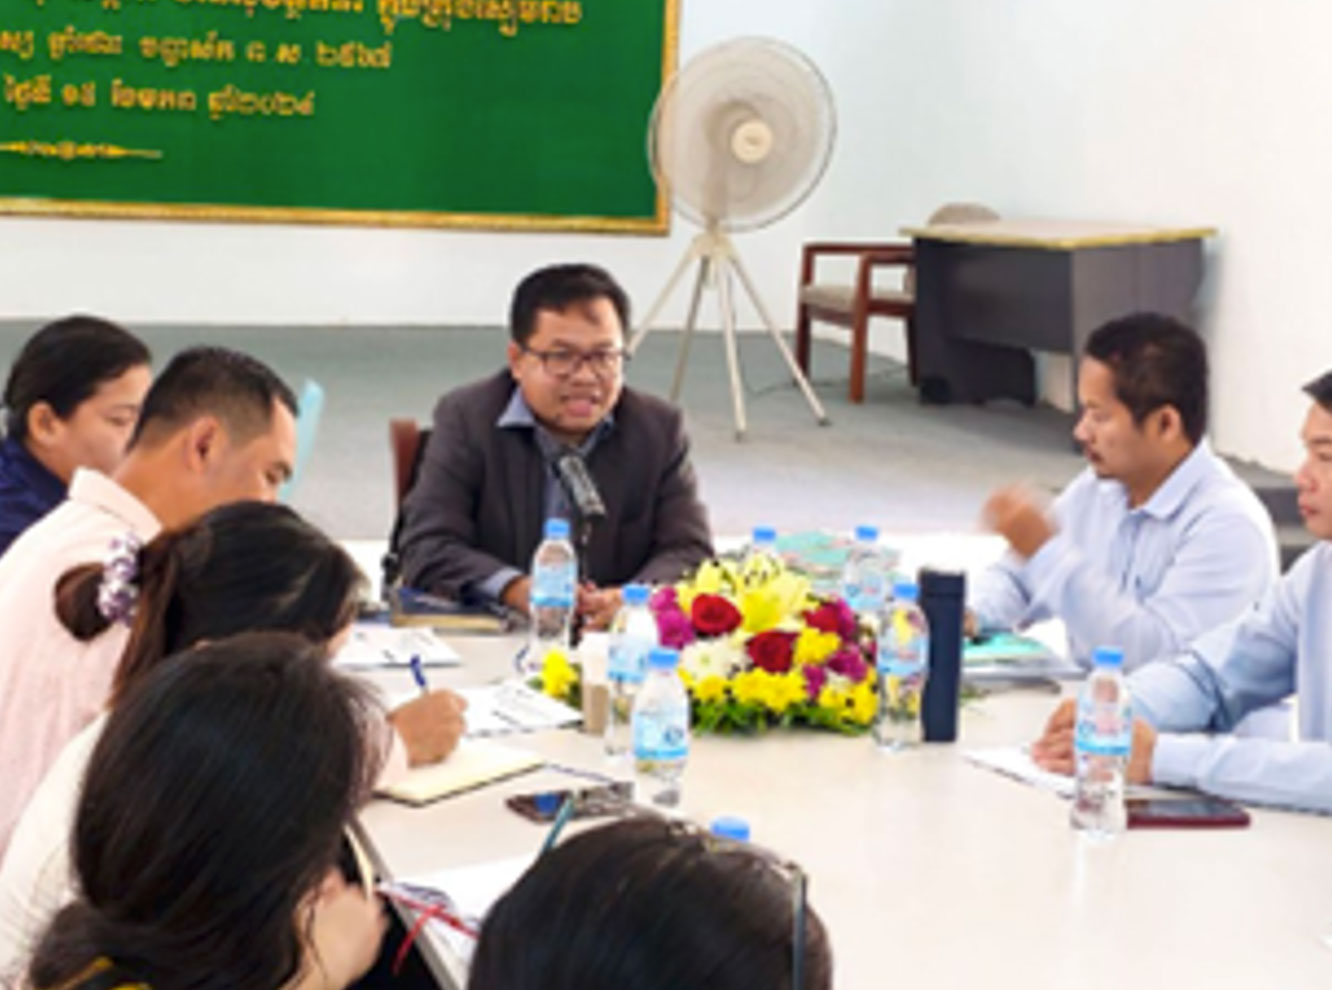 This workshop lead by external consultants to provide guidance on how to draft waste management plans, Municipality of Siem Reap, Cambodia